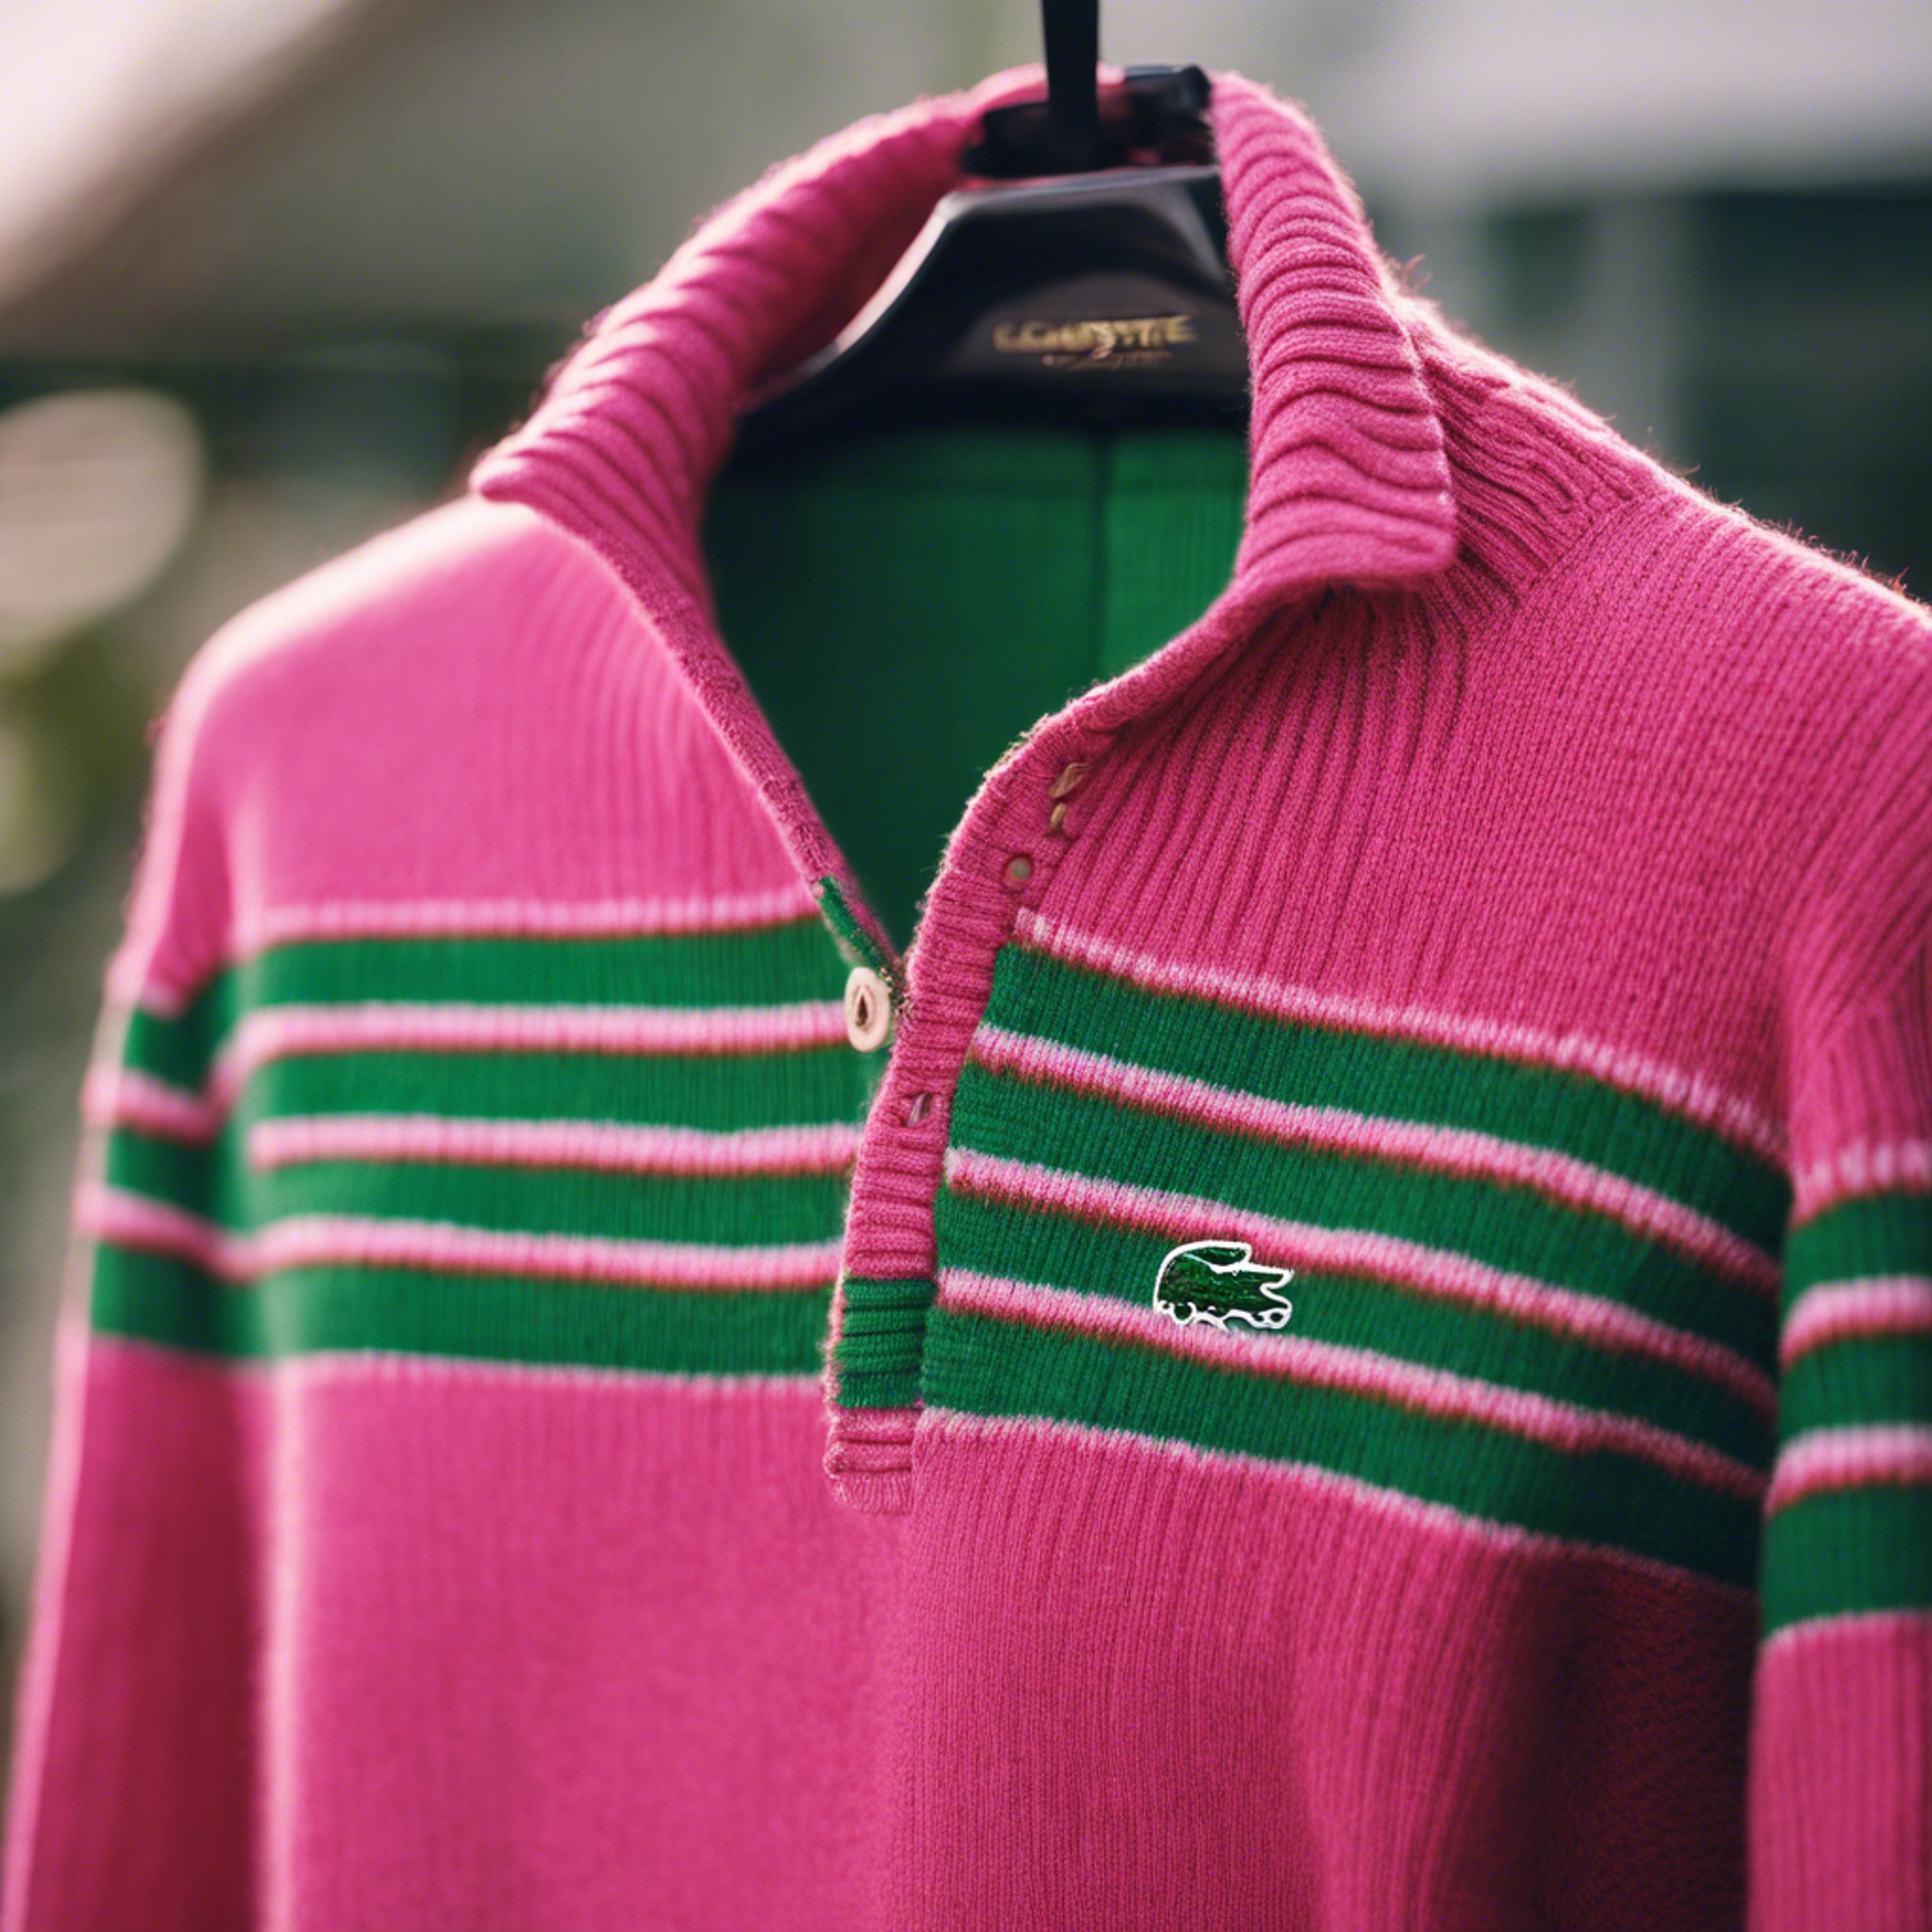 A preppy Lacoste sweater in bright pink and green stripes. Wallpaper[46dc671cf42d4e658ddb]